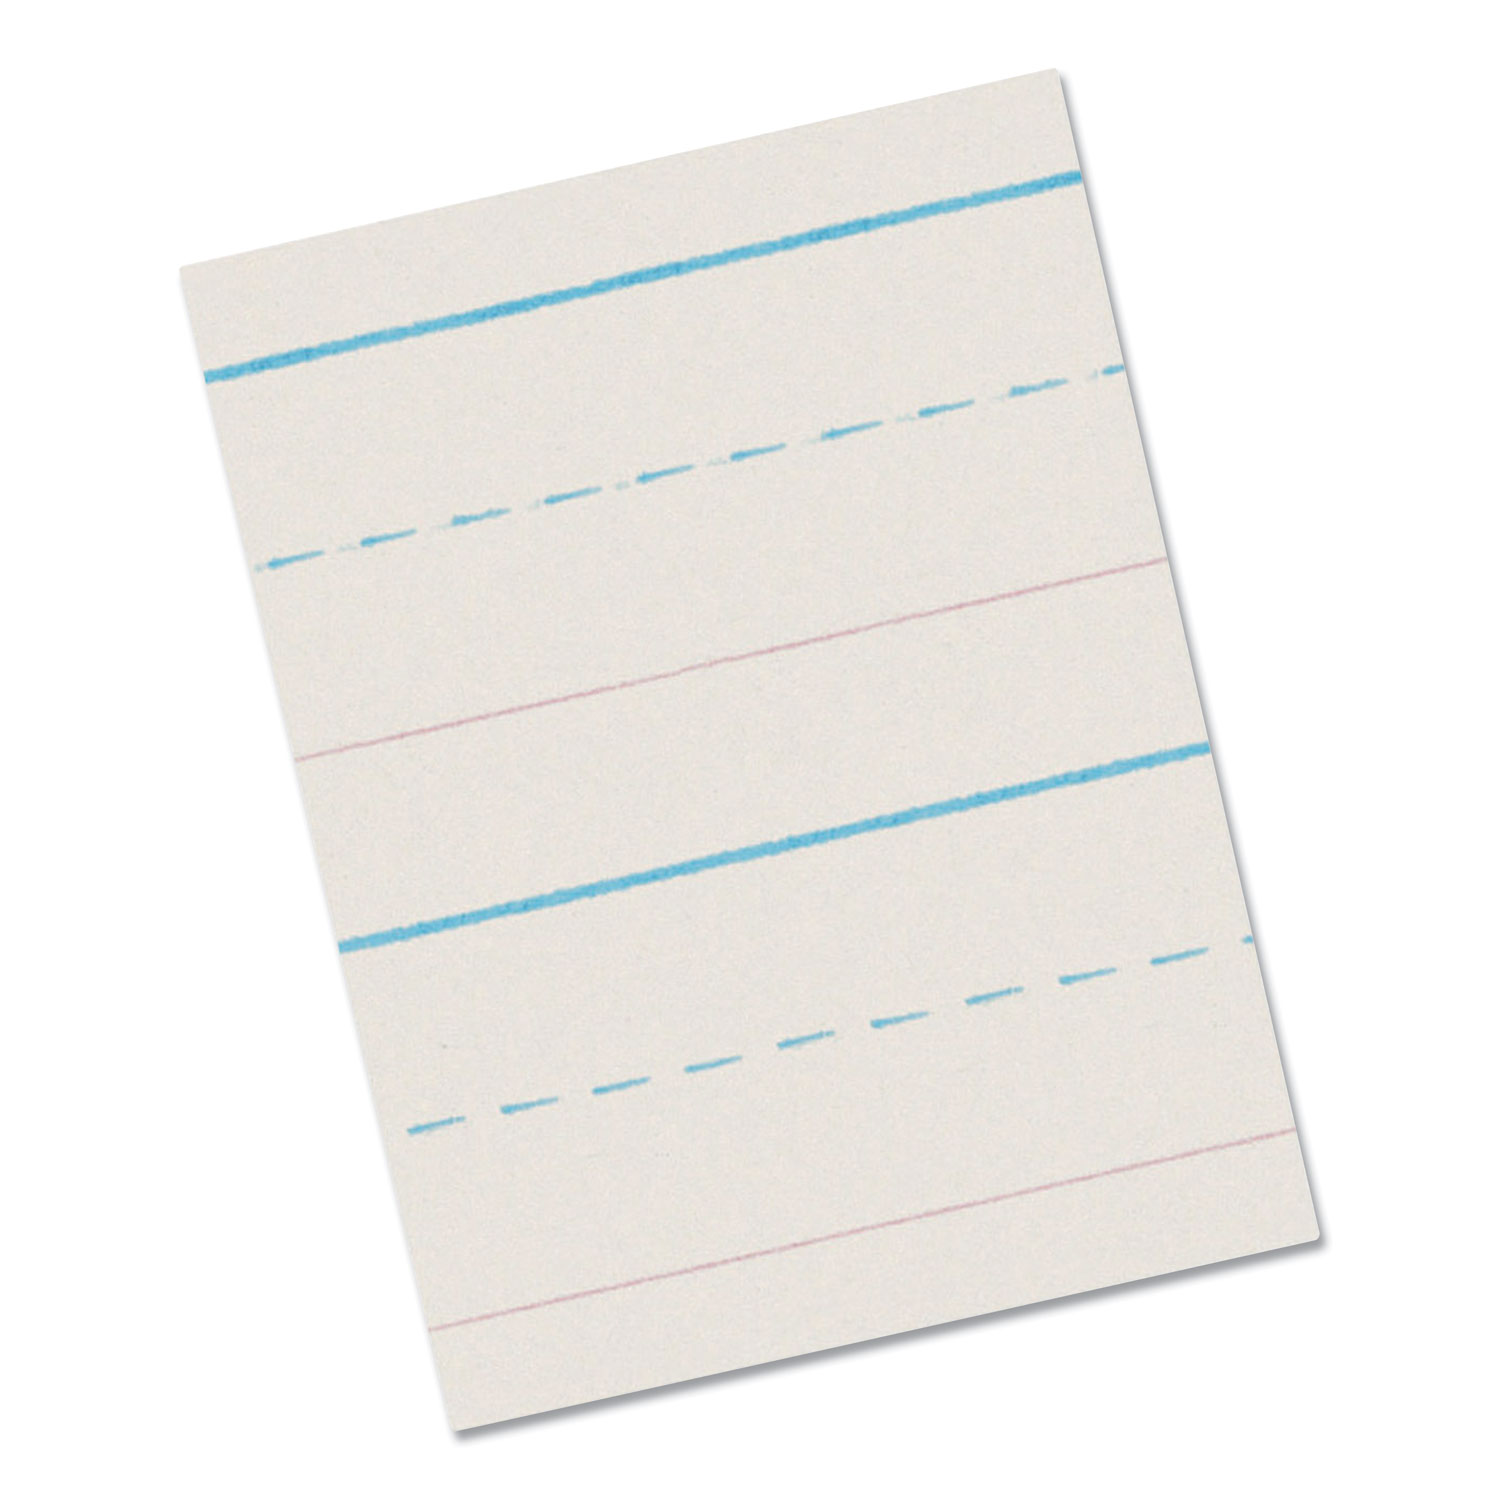 Pacon® Multi-Program Handwriting Paper, 30 lb, 5/8 Long Rule, Two-Sided, 8.5 x 11, 500/Pack